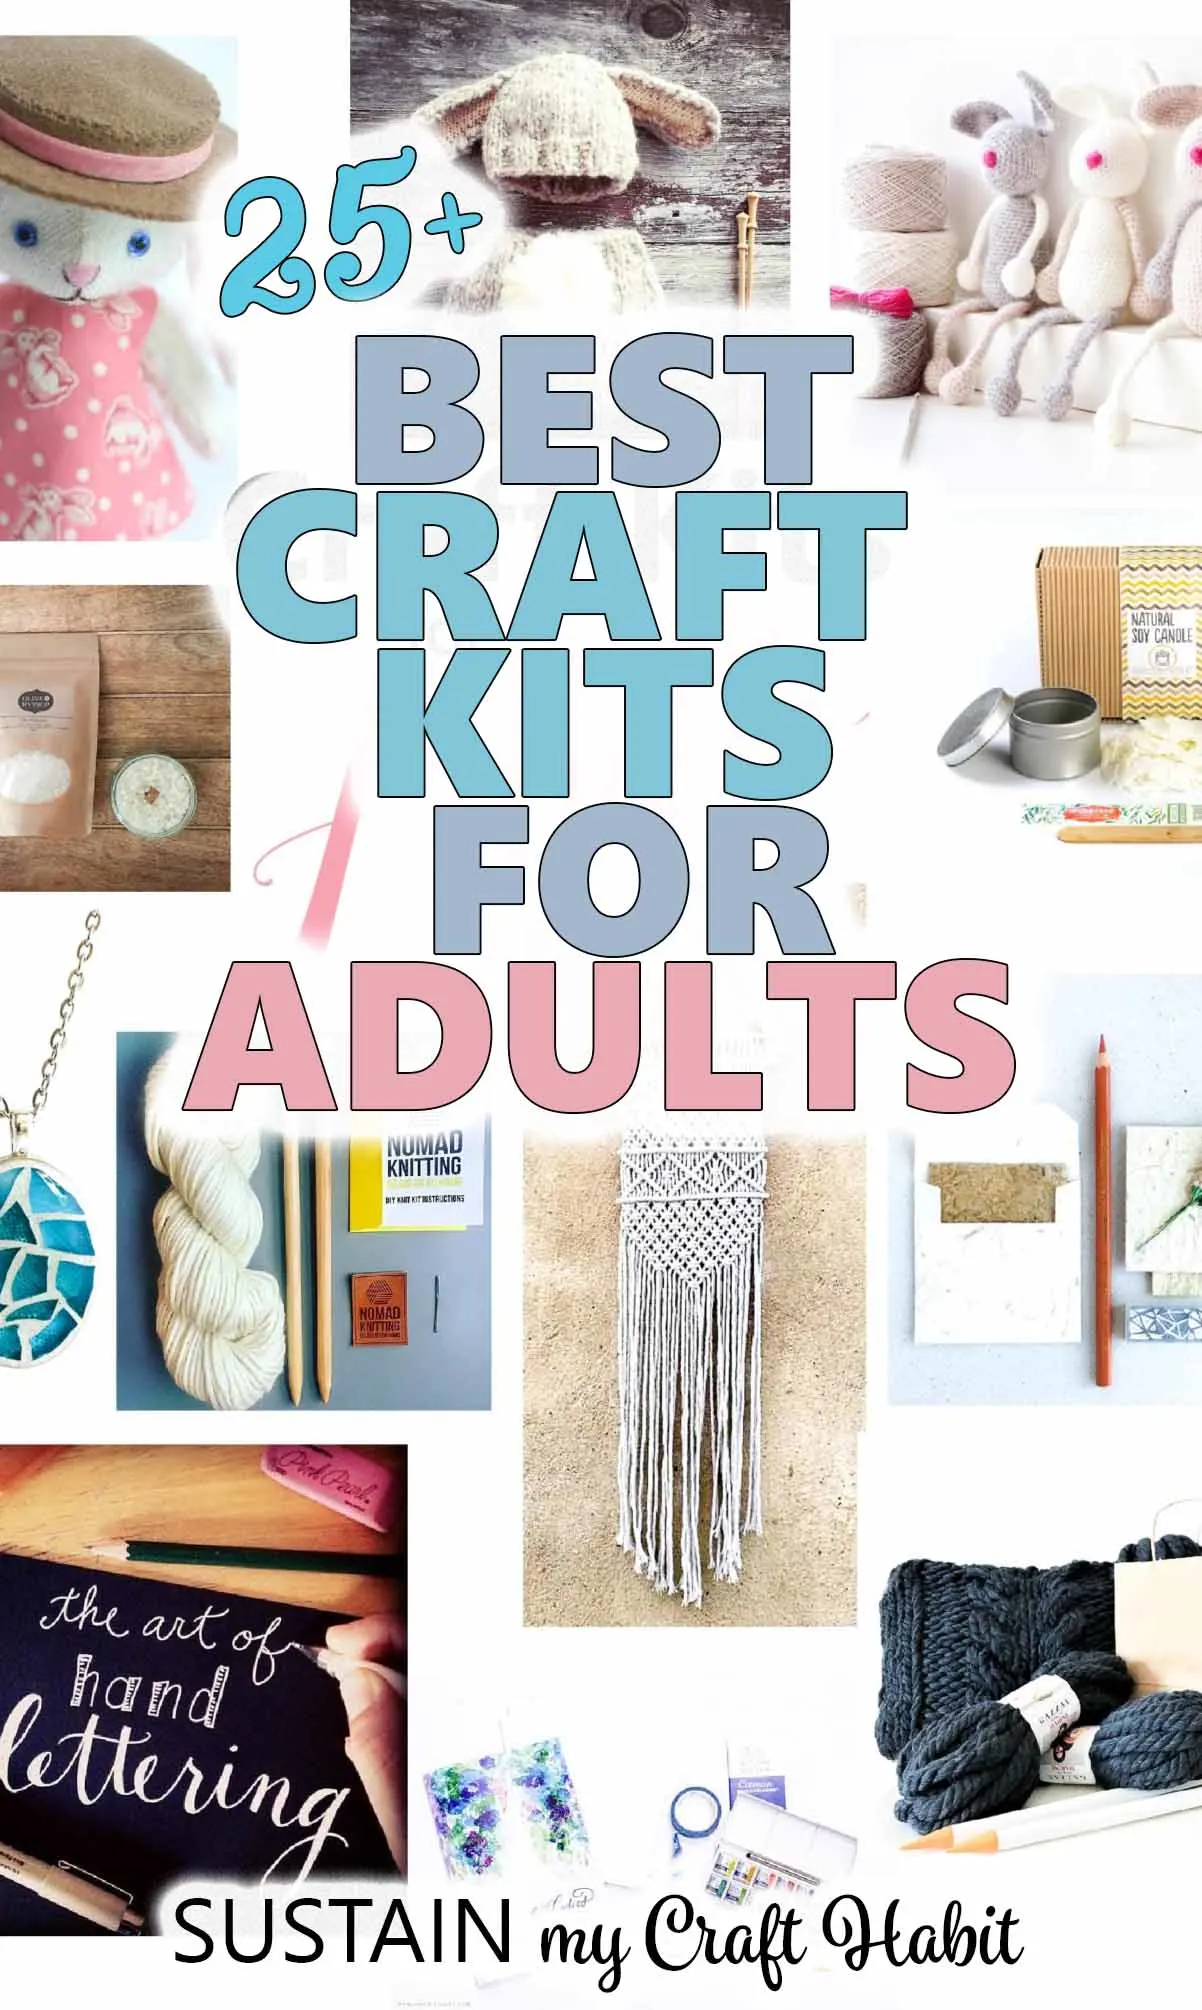 Favorite Craft Kits for Adults  Craft kits, Adult crafts, Diy crafts for  adults